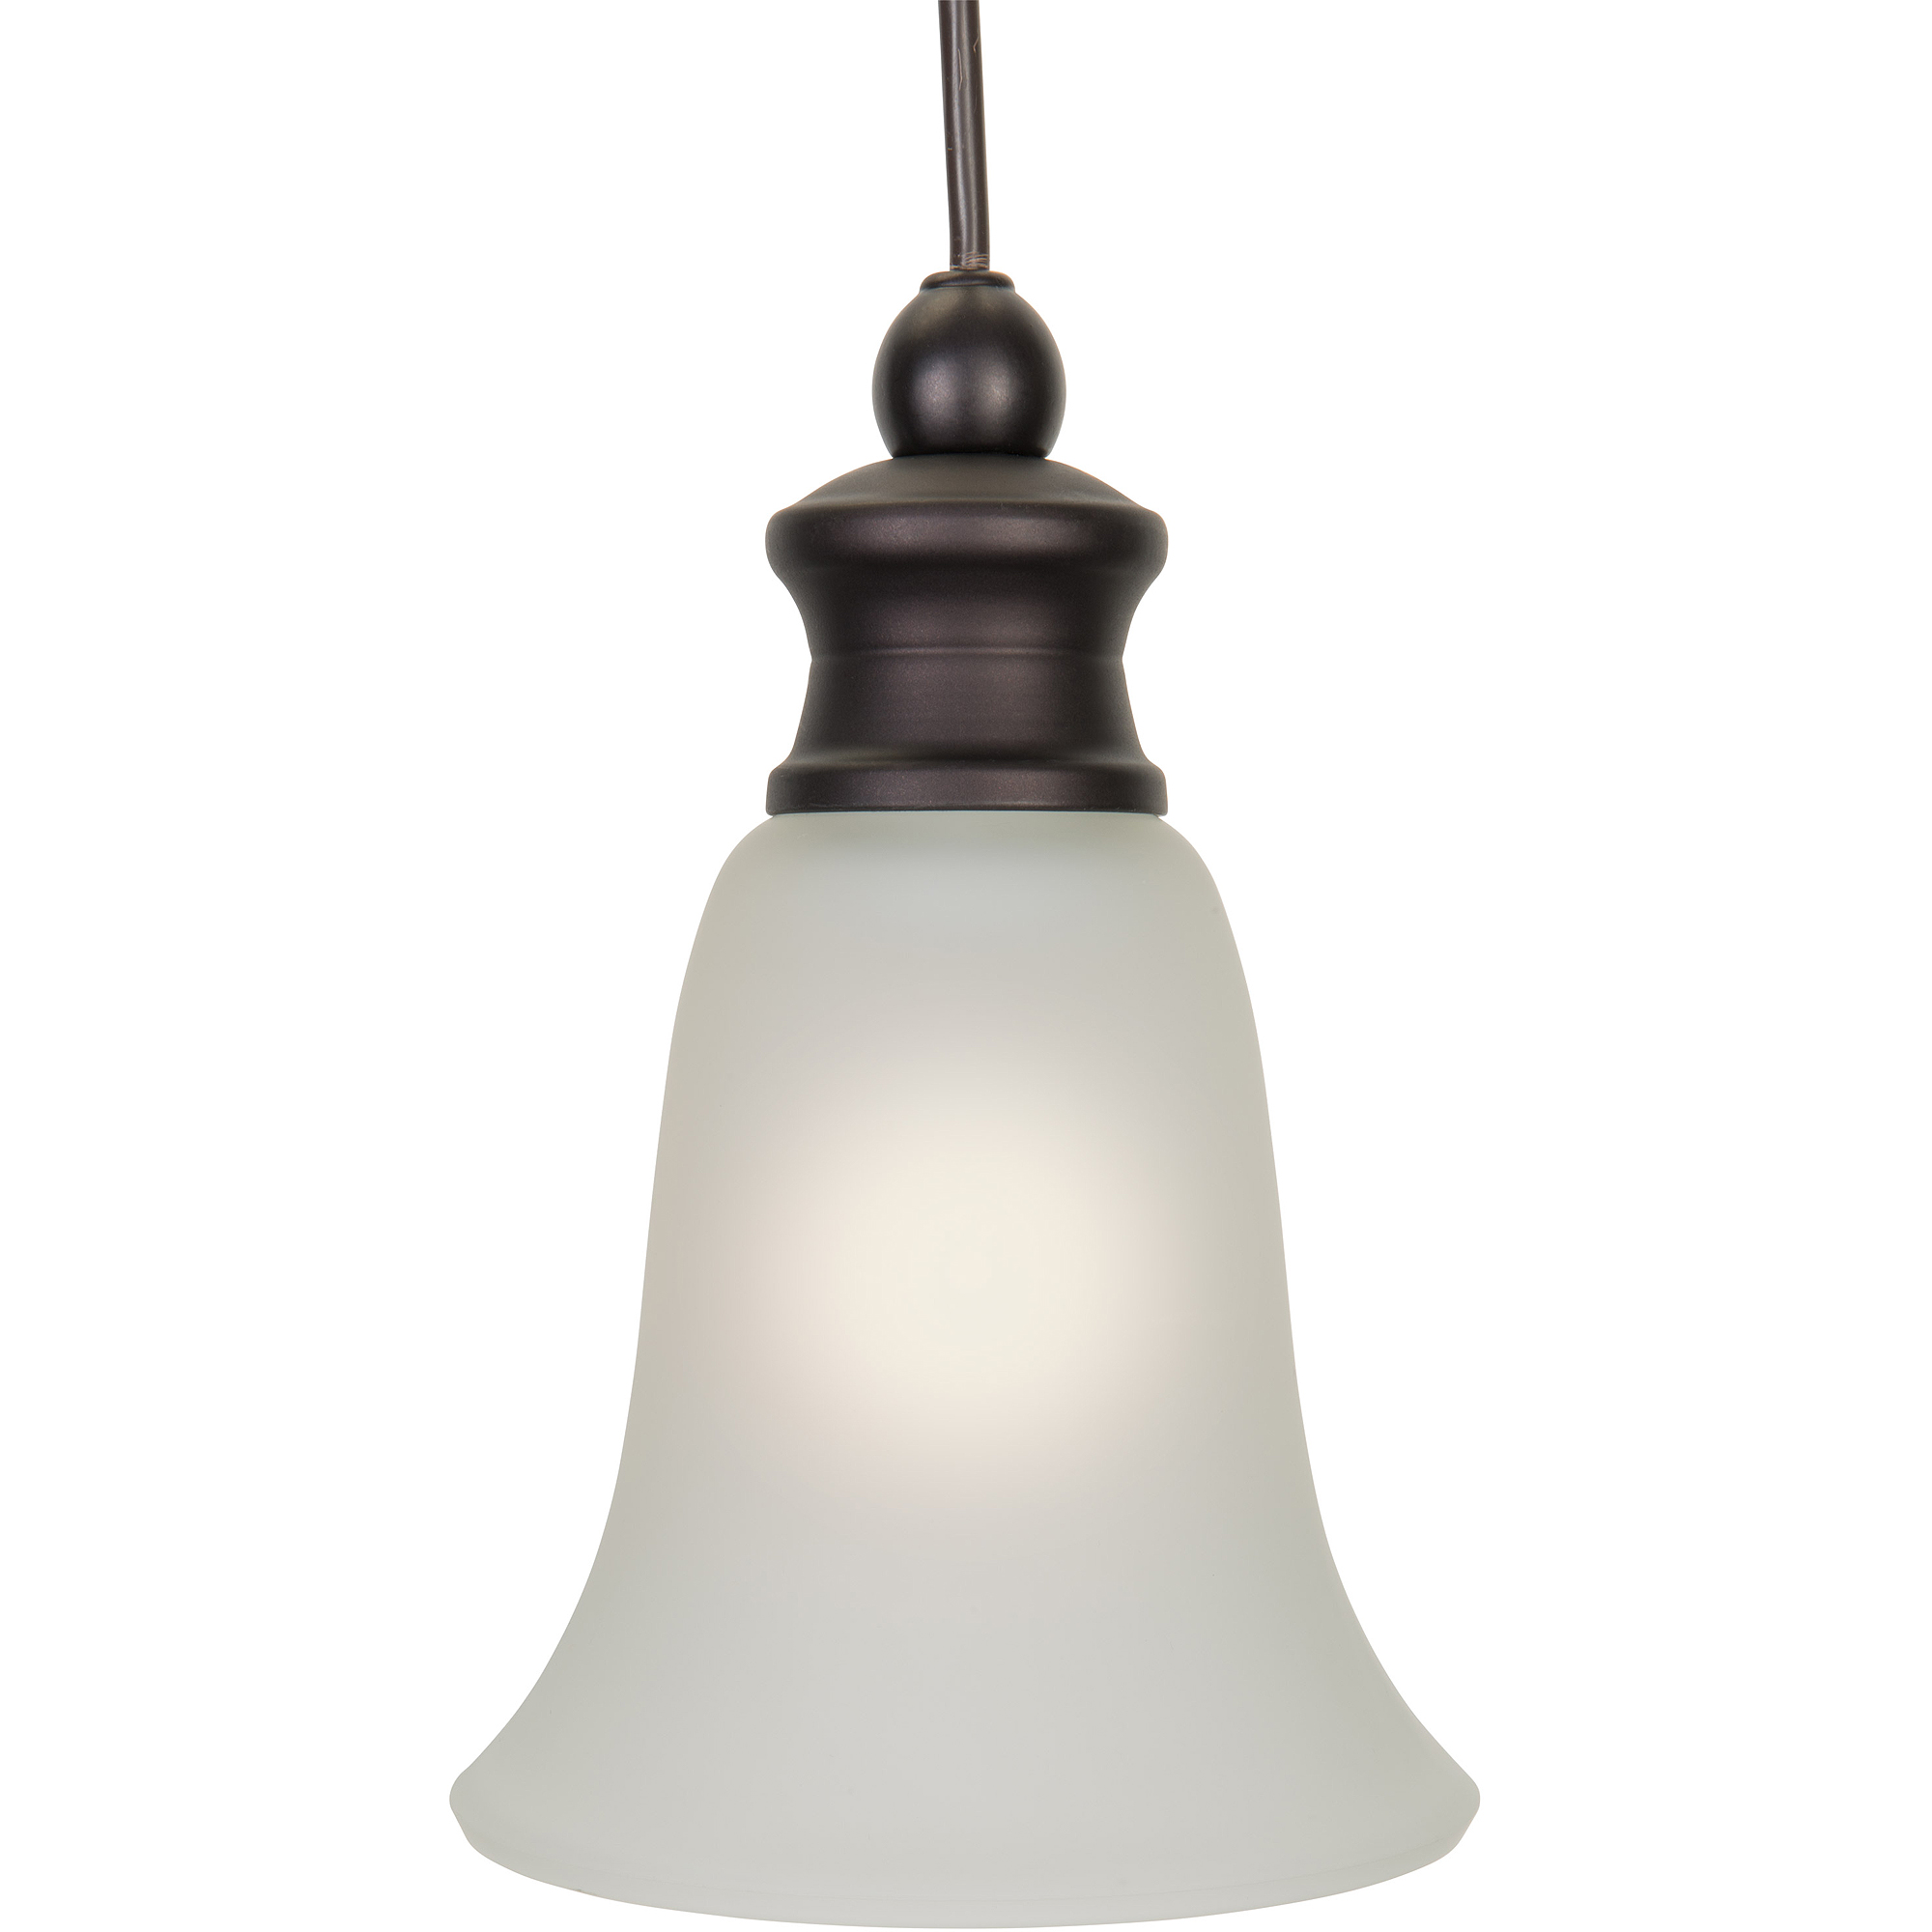 Better Homes and Gardens pendant indoor ceiling light for $15